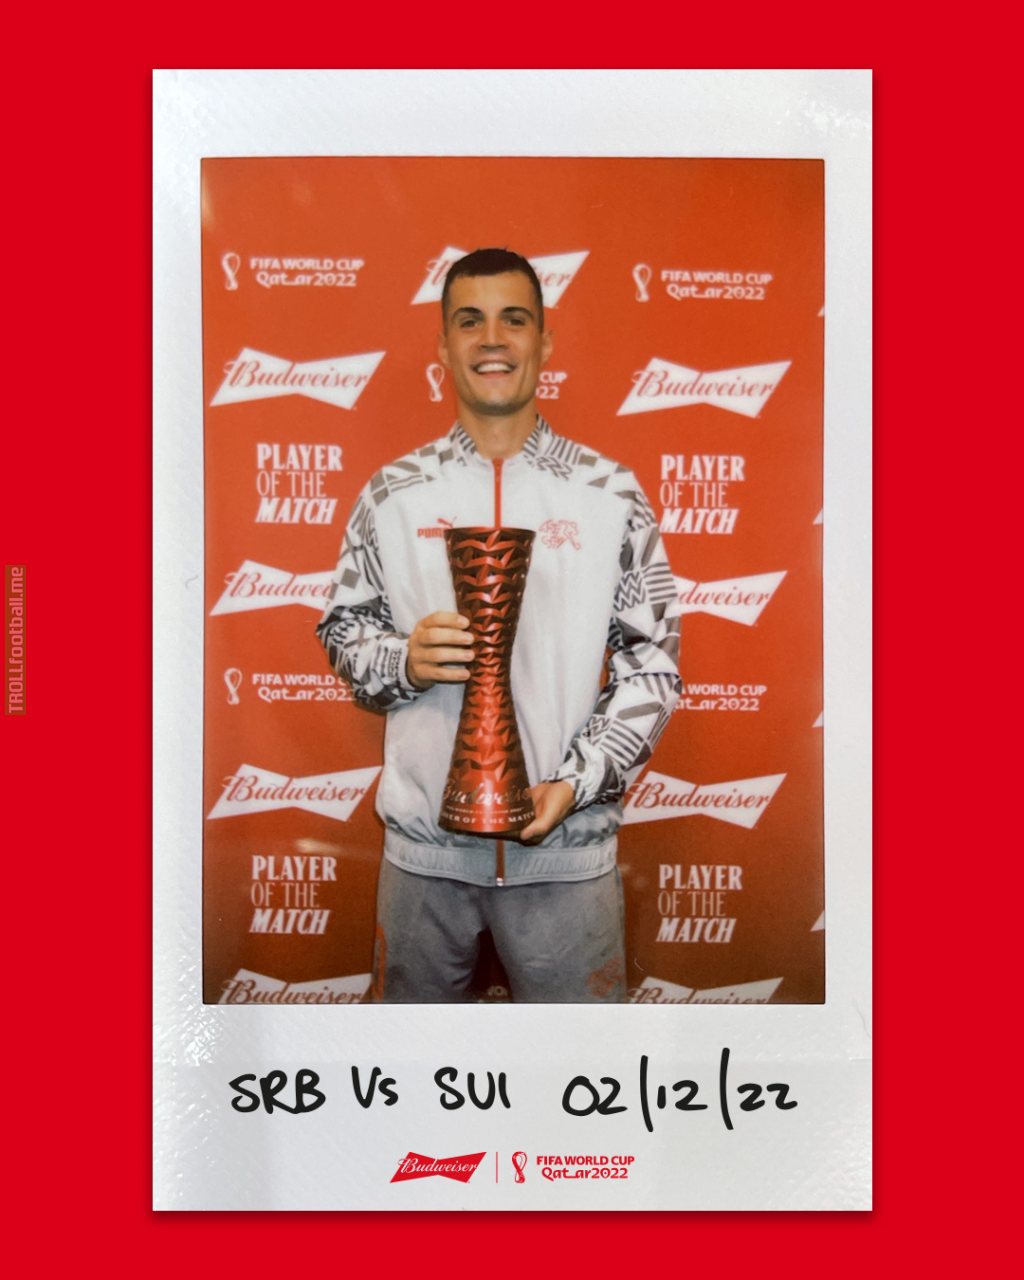 Granit Xhaka awarded Player of the Match